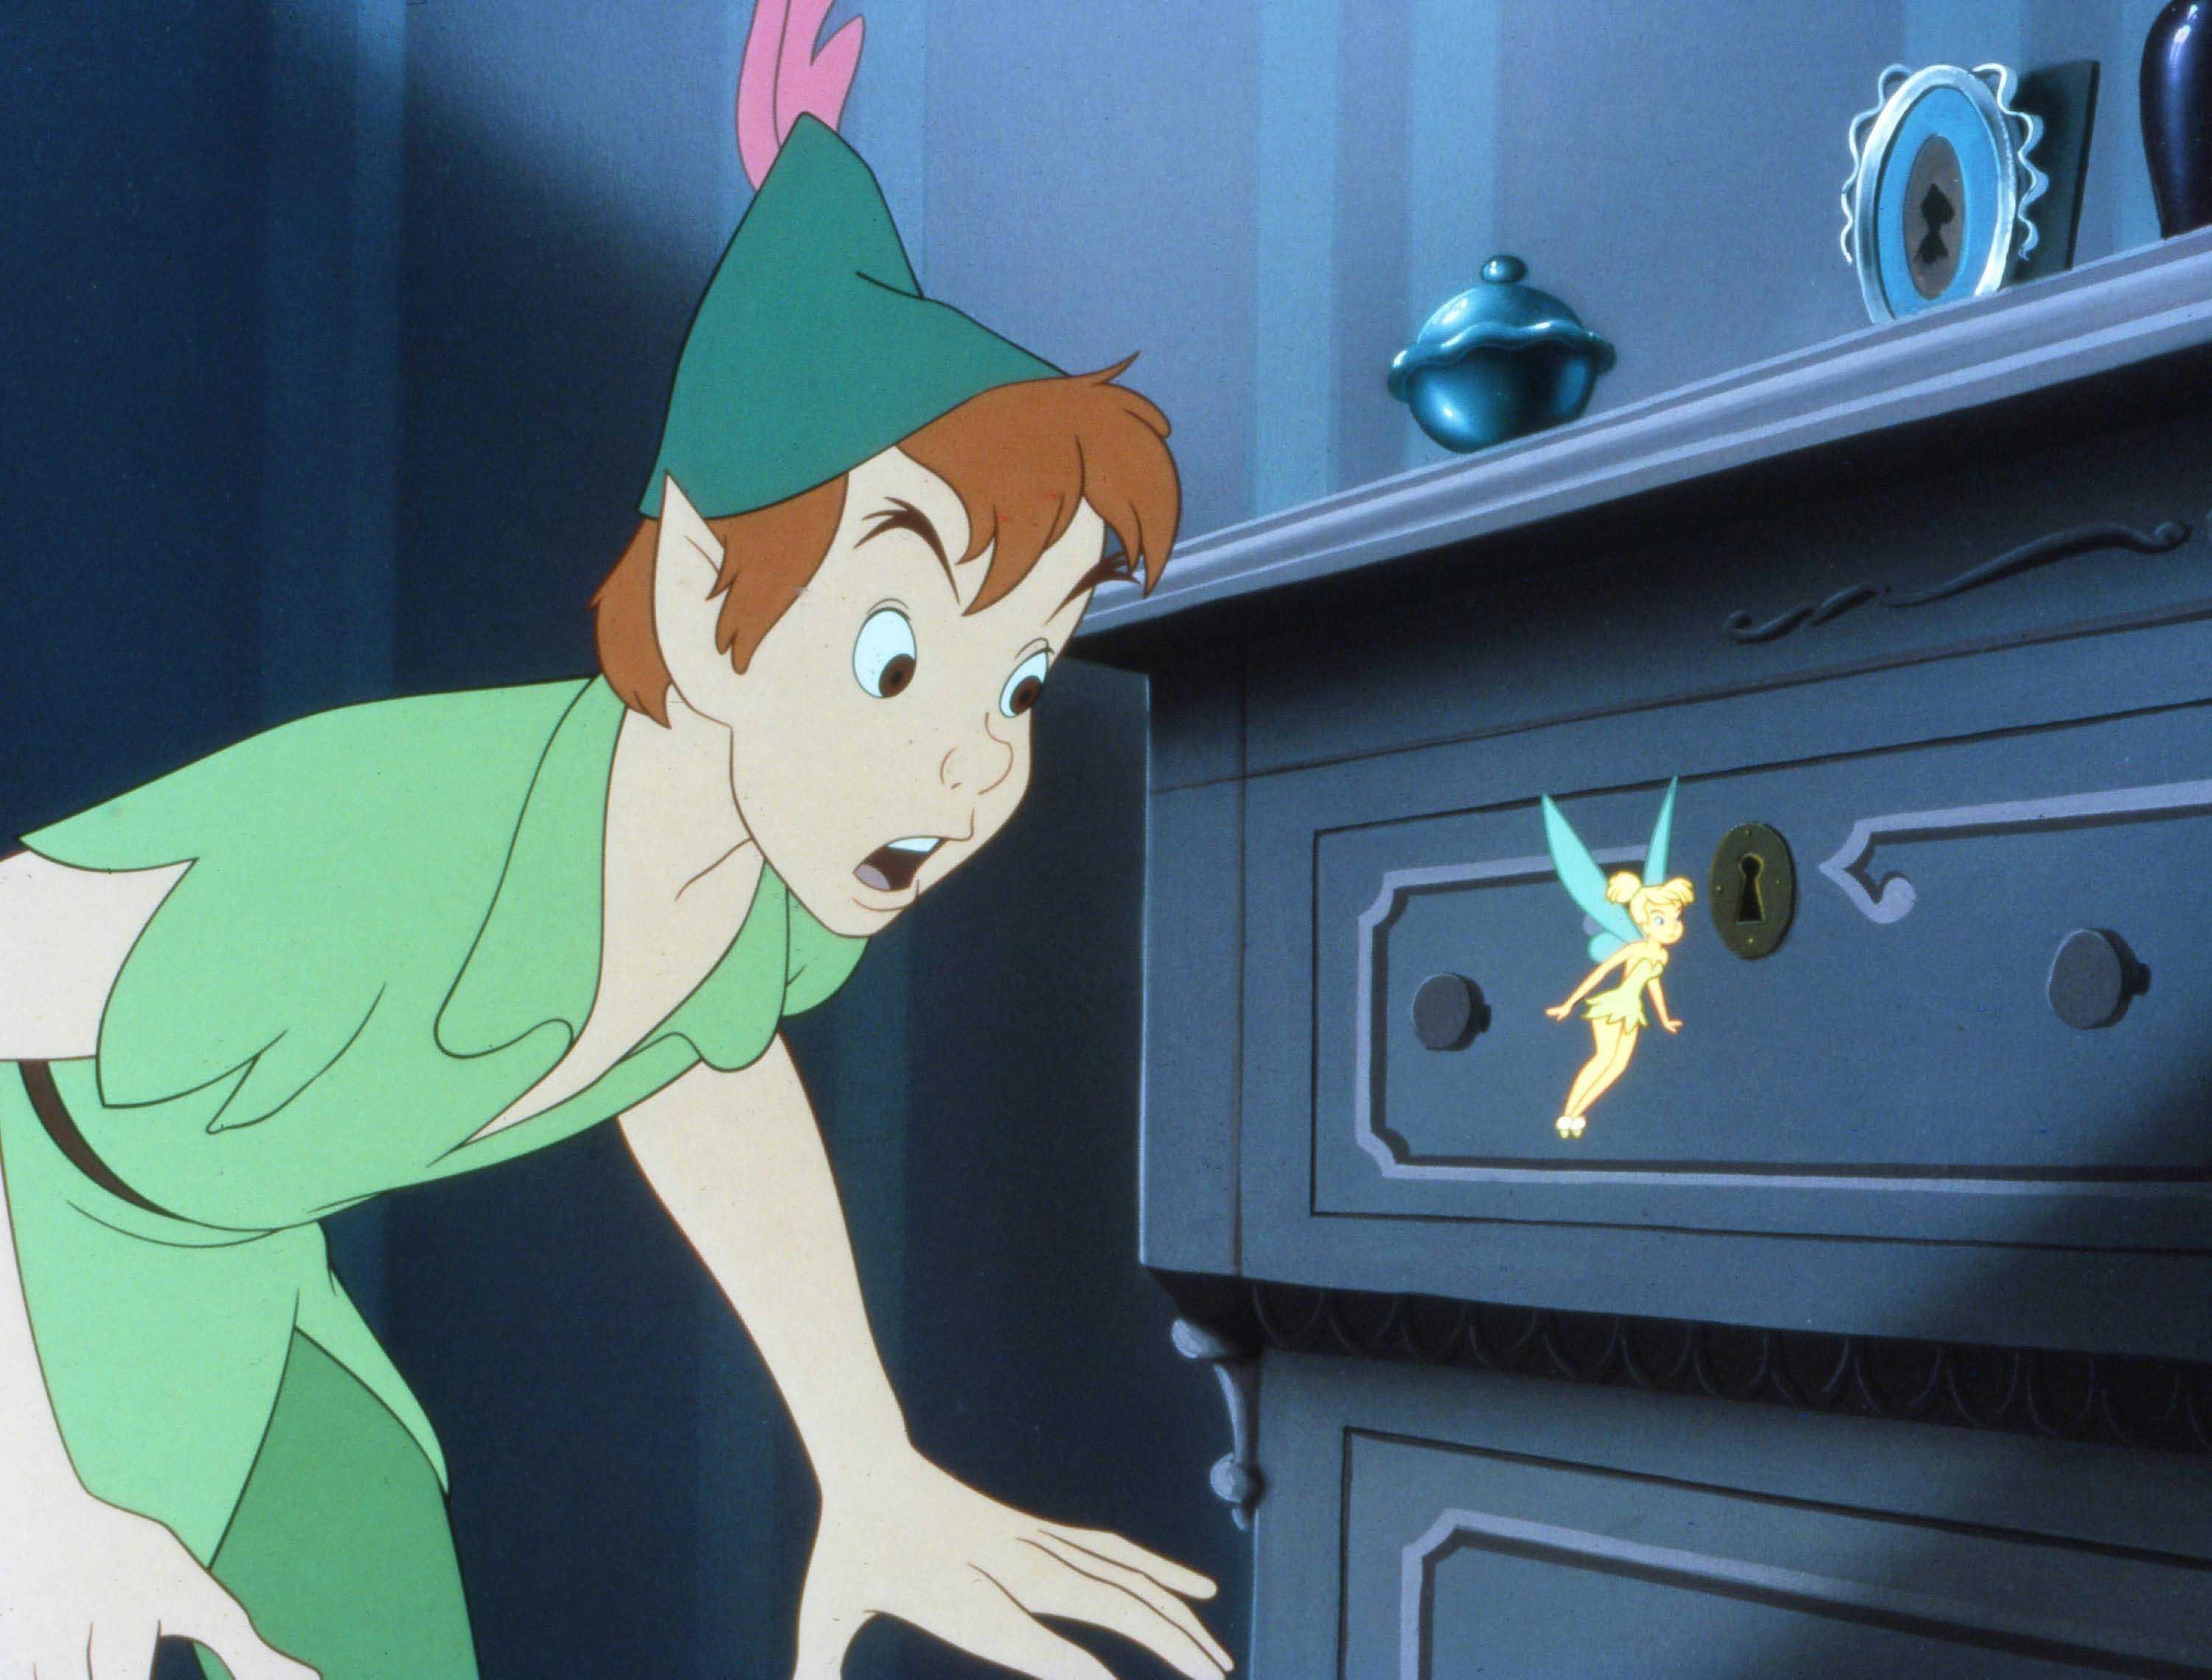 Peter Pan Stage Play Debut, 1904: Today in Disney History